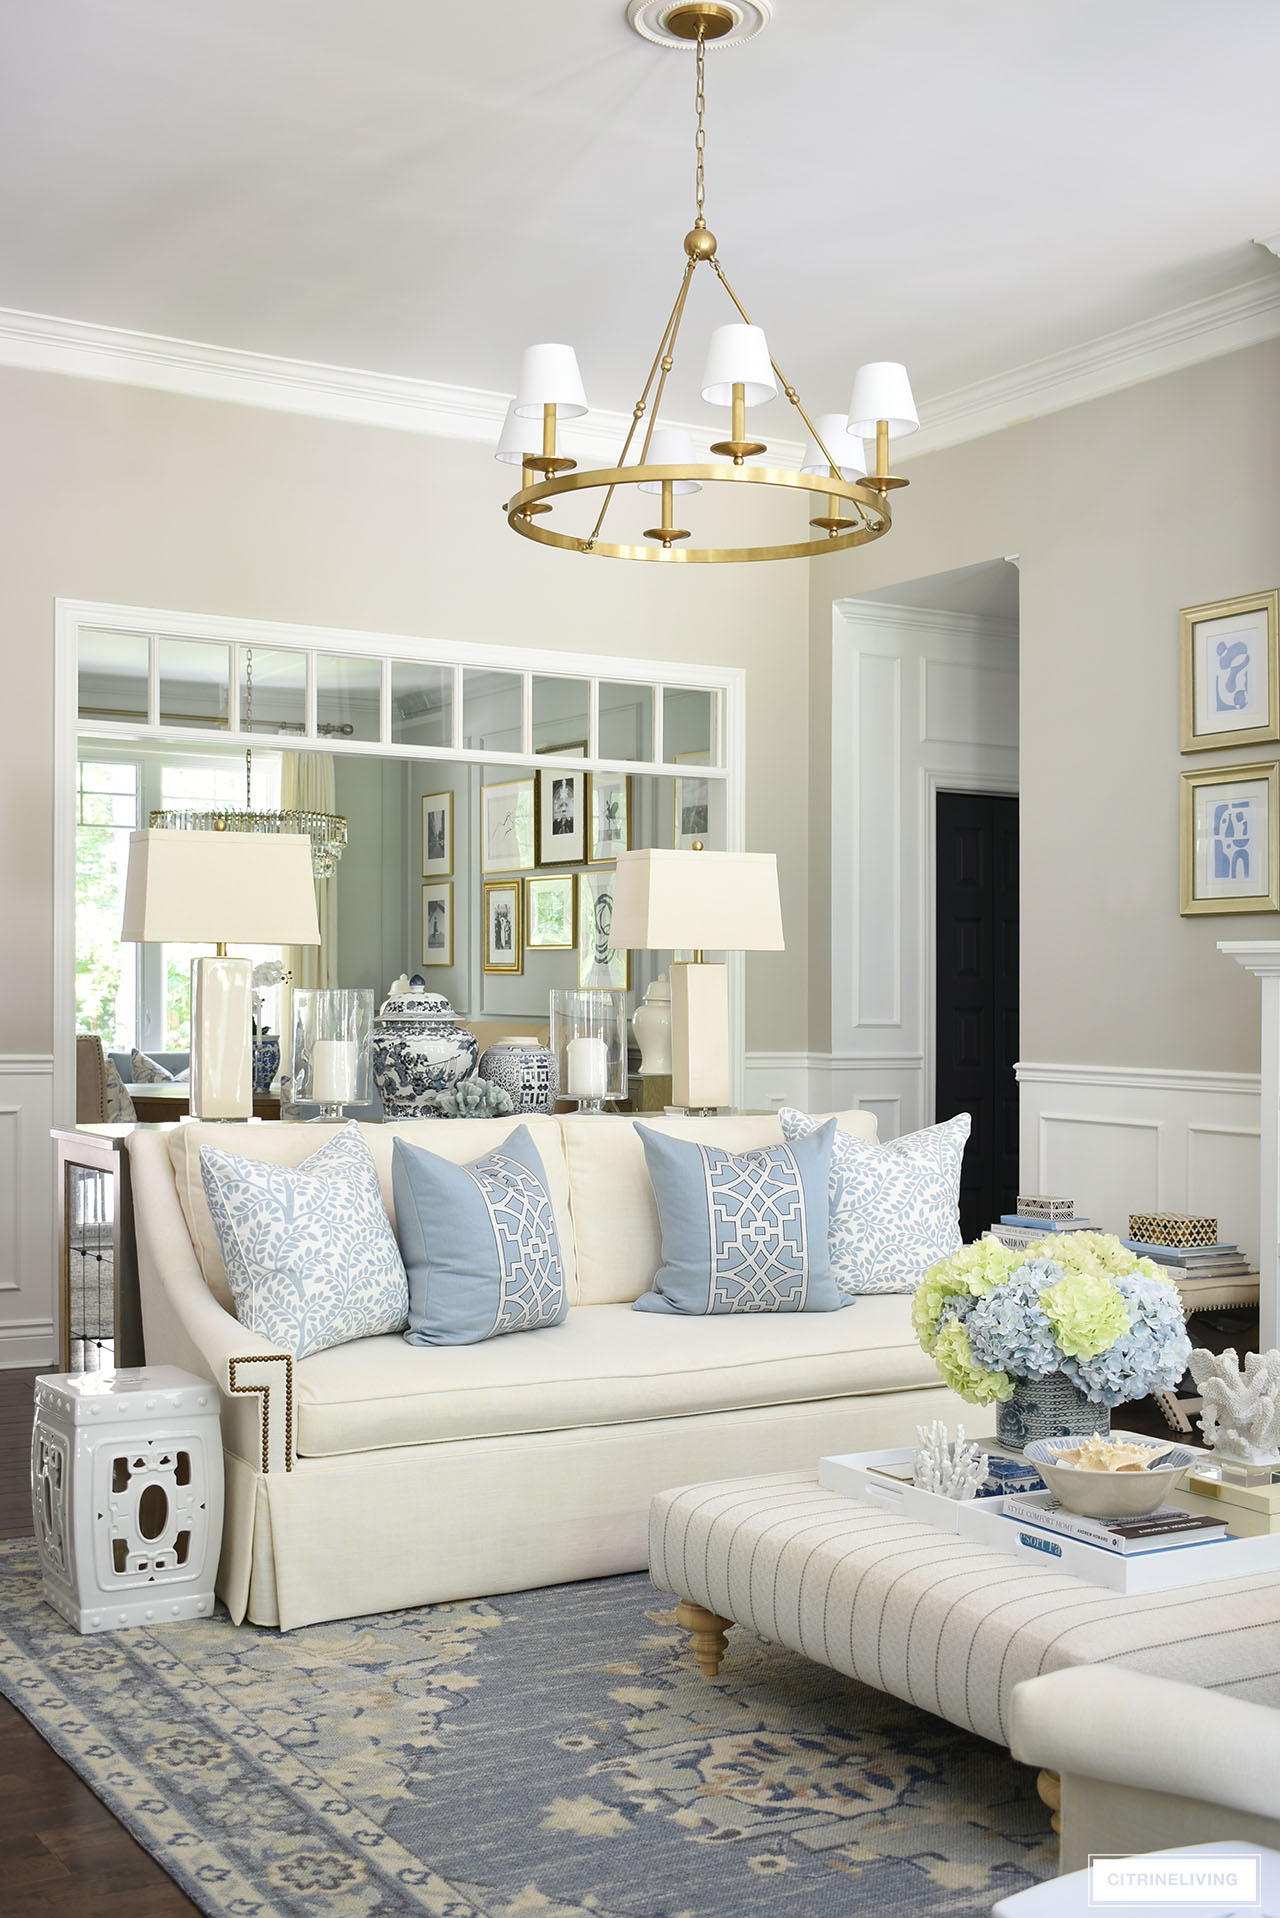 Traditional home with elegant summer decor in light blues and warm whites accented with coastal elements and light blue and light green hydrangeas.